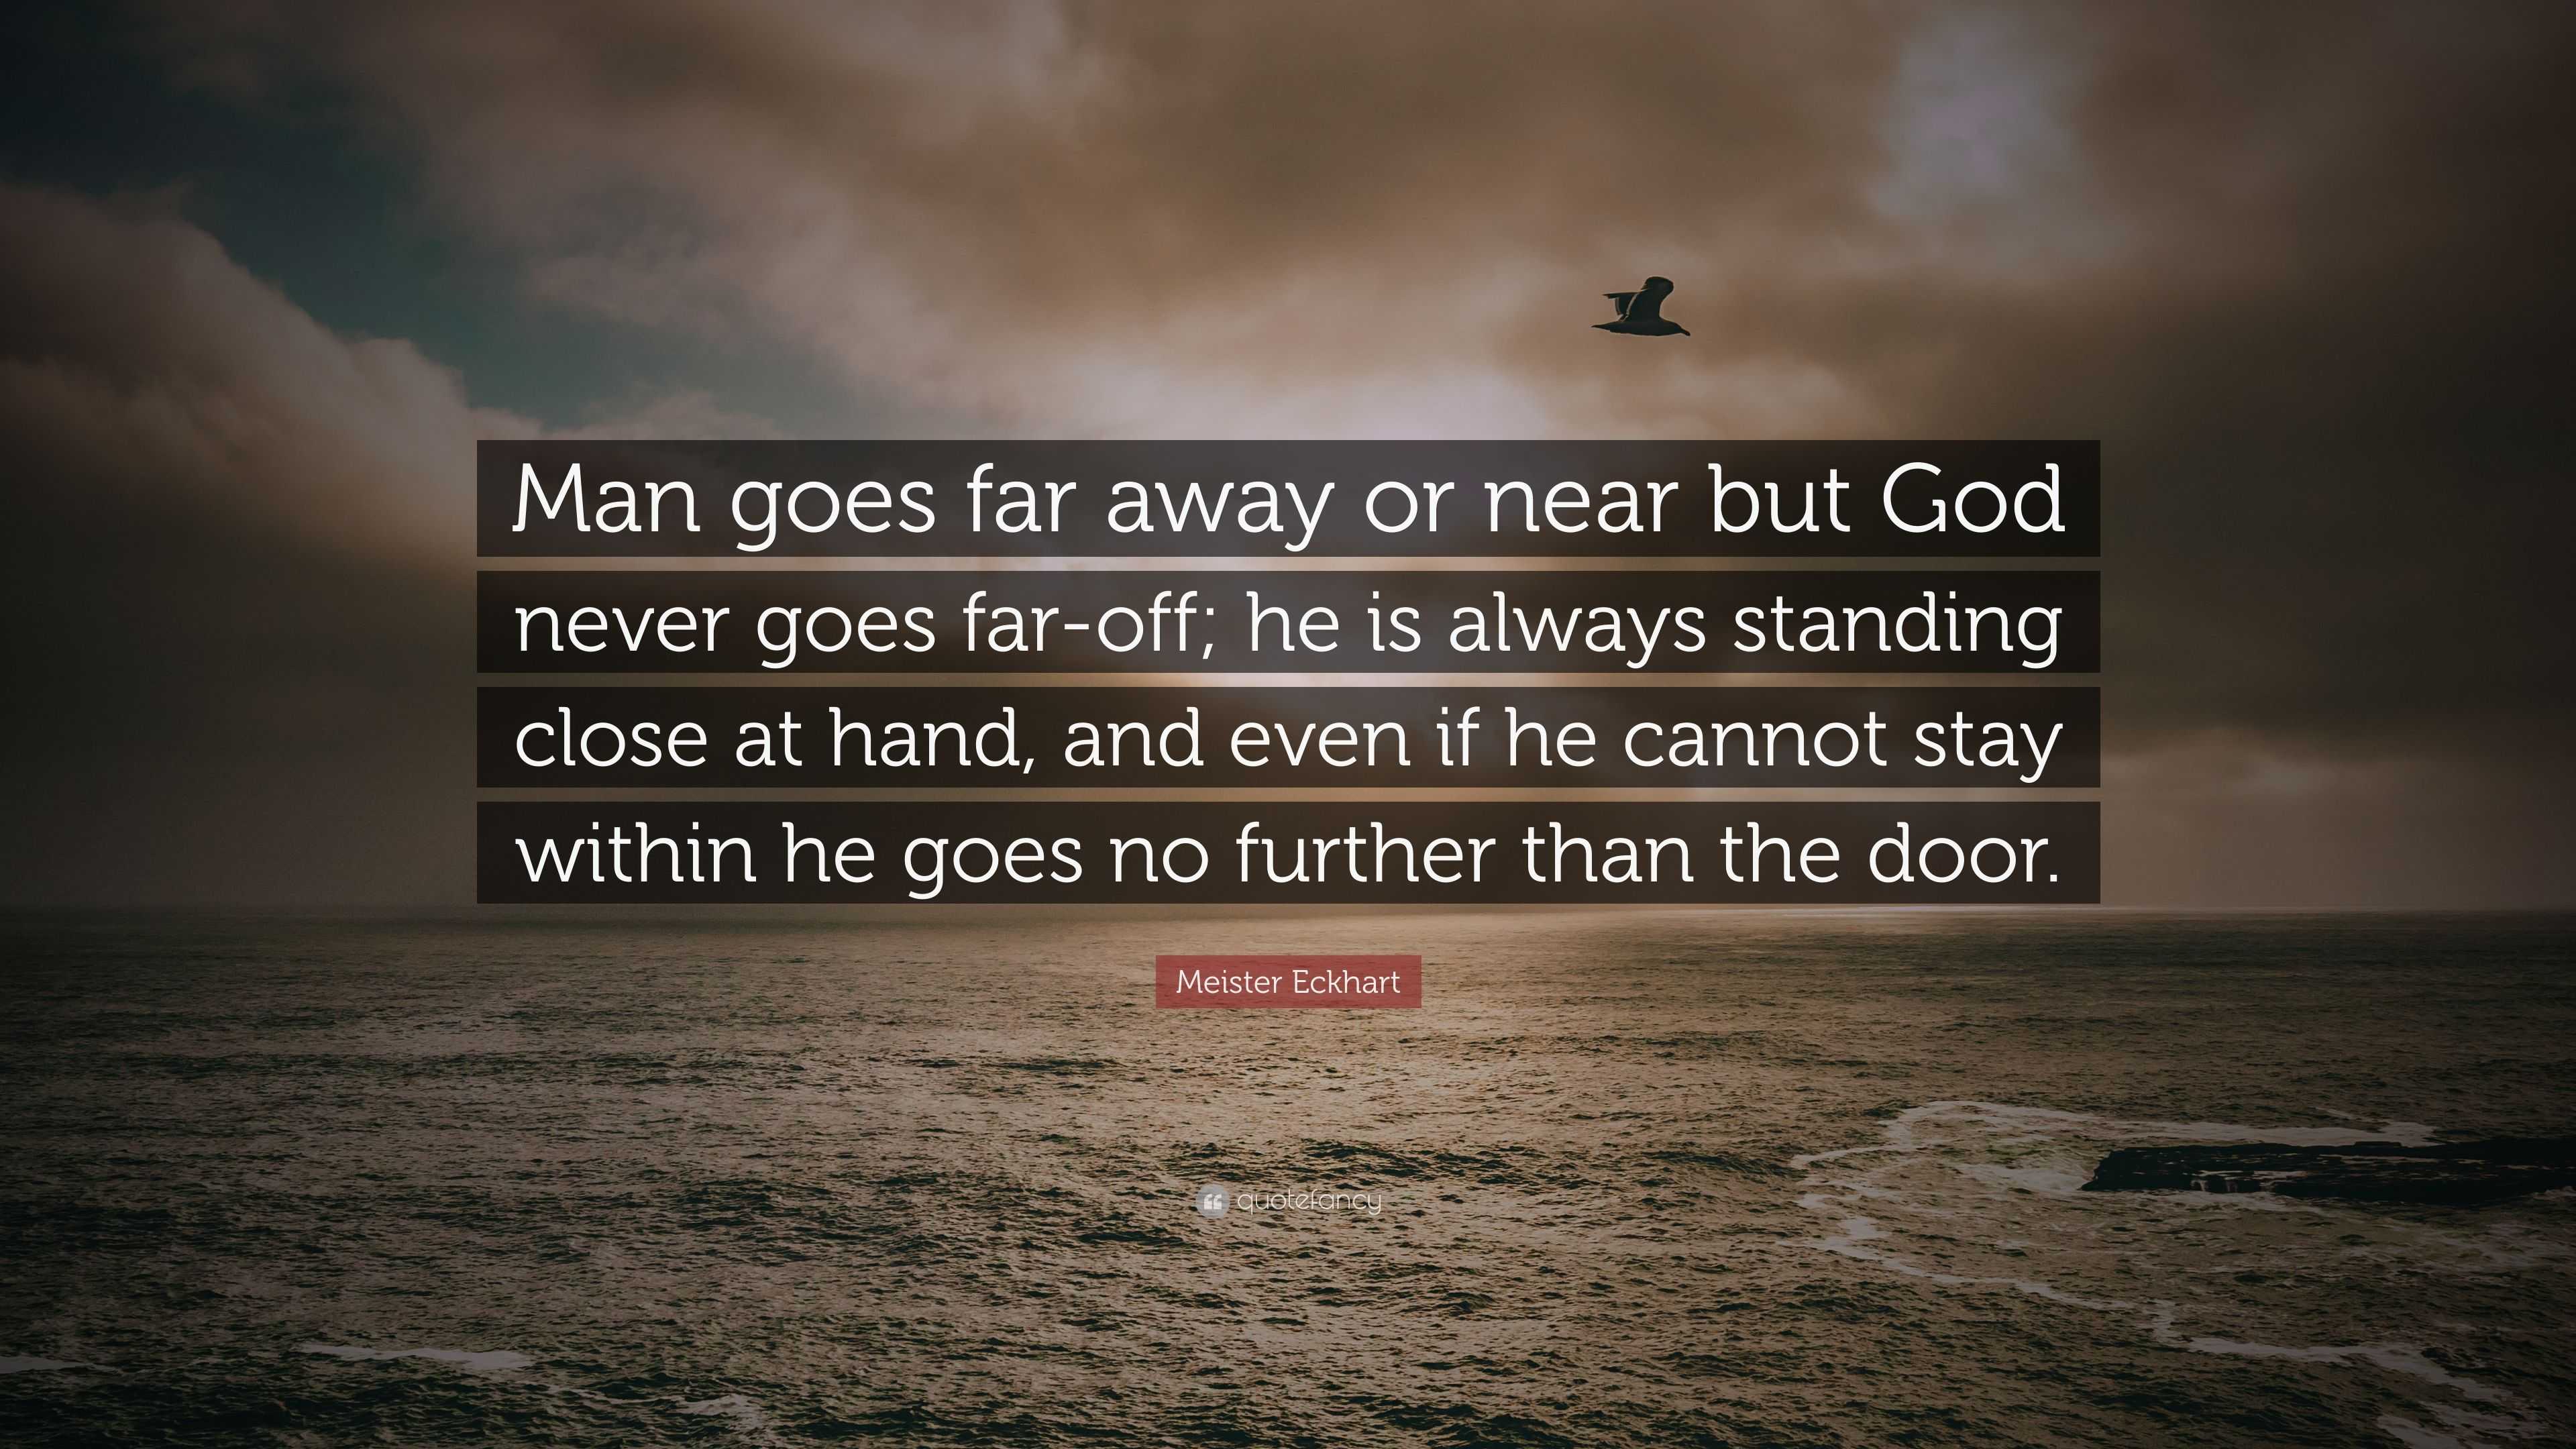 Meister Eckhart Quote: “Man goes far away or near but God never goes ...